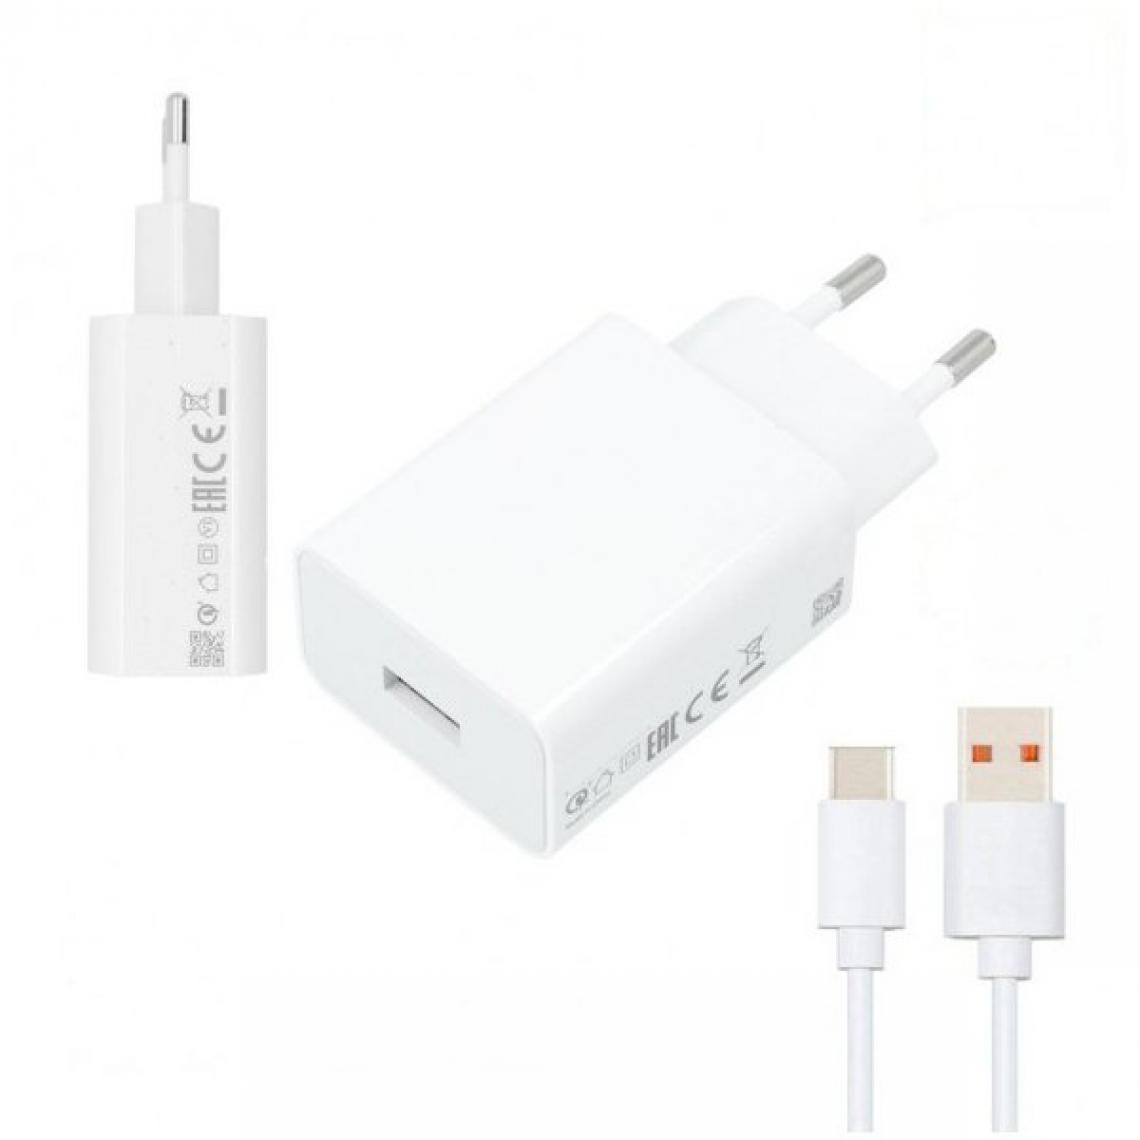 Phonecare - Kit Chargeur Turbo Fast Charge 33W 3A USB + Câble de Charge Turbo Fast Charge 5A Type-C 1M - Xiaomi Mi 11 Lite - Autres accessoires smartphone